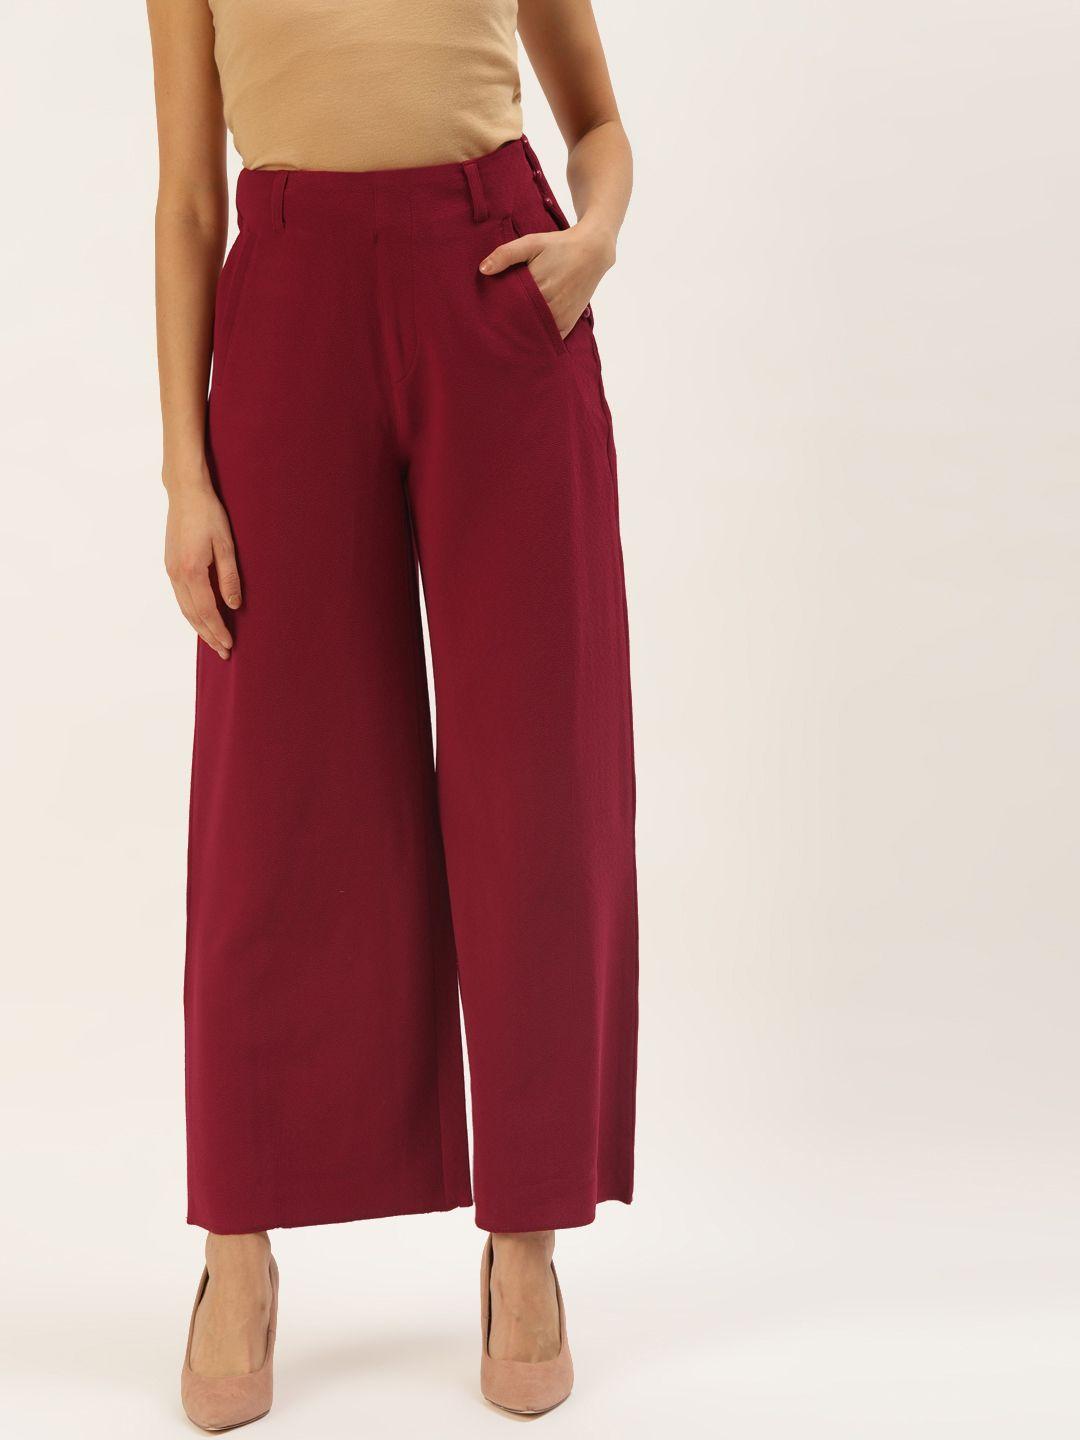 zastraa women red solid flared culottes trousers